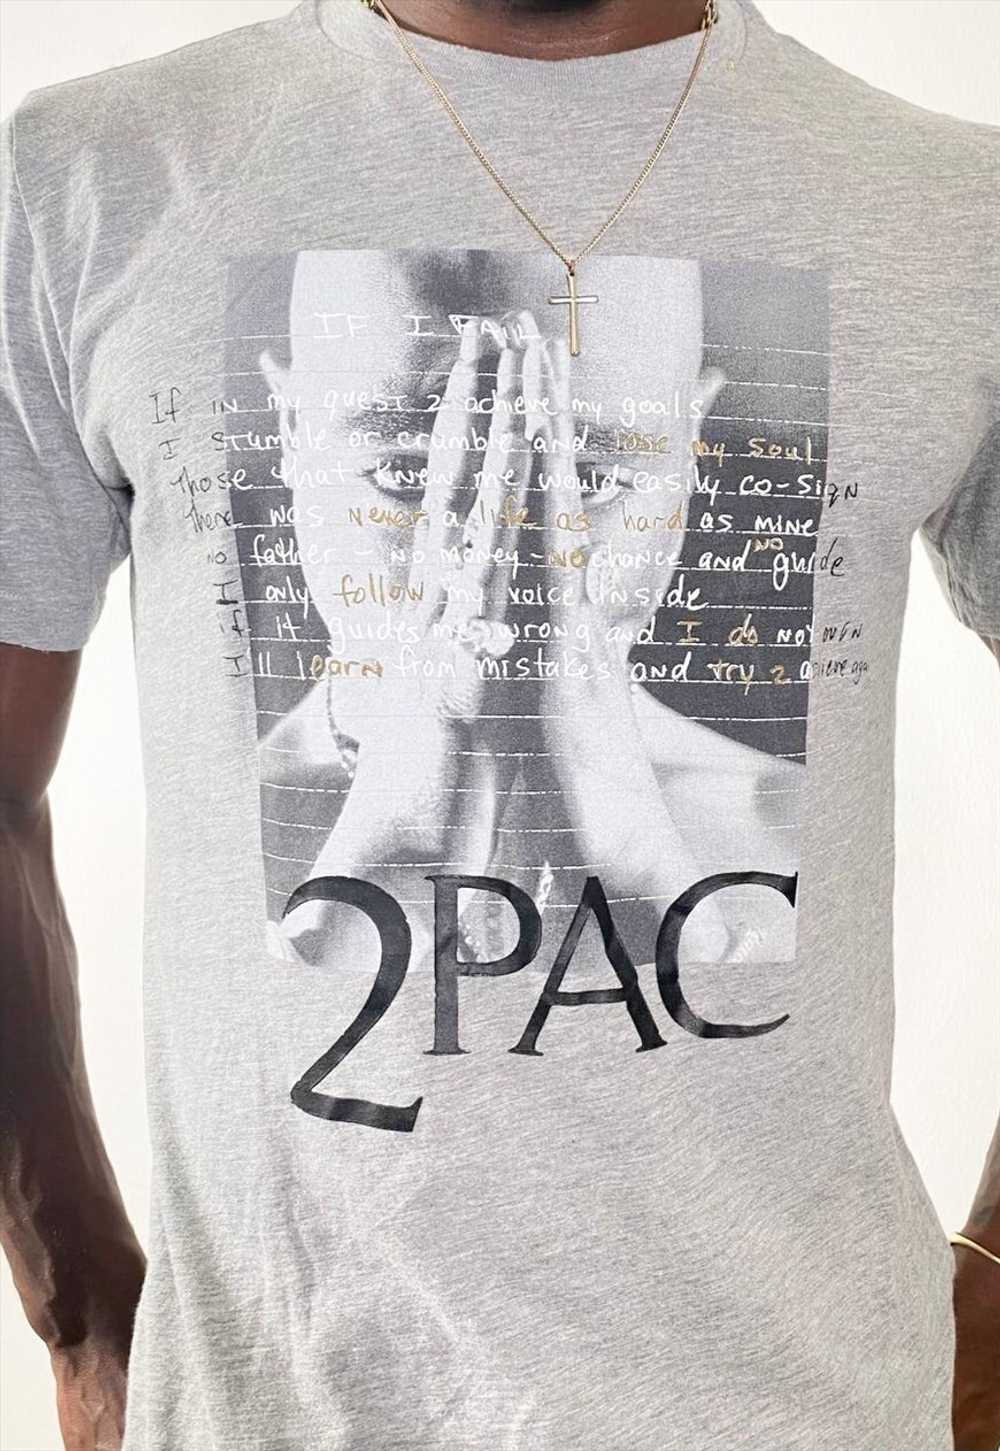 Preloved "Pac tribute limited edition t-shirt - image 3